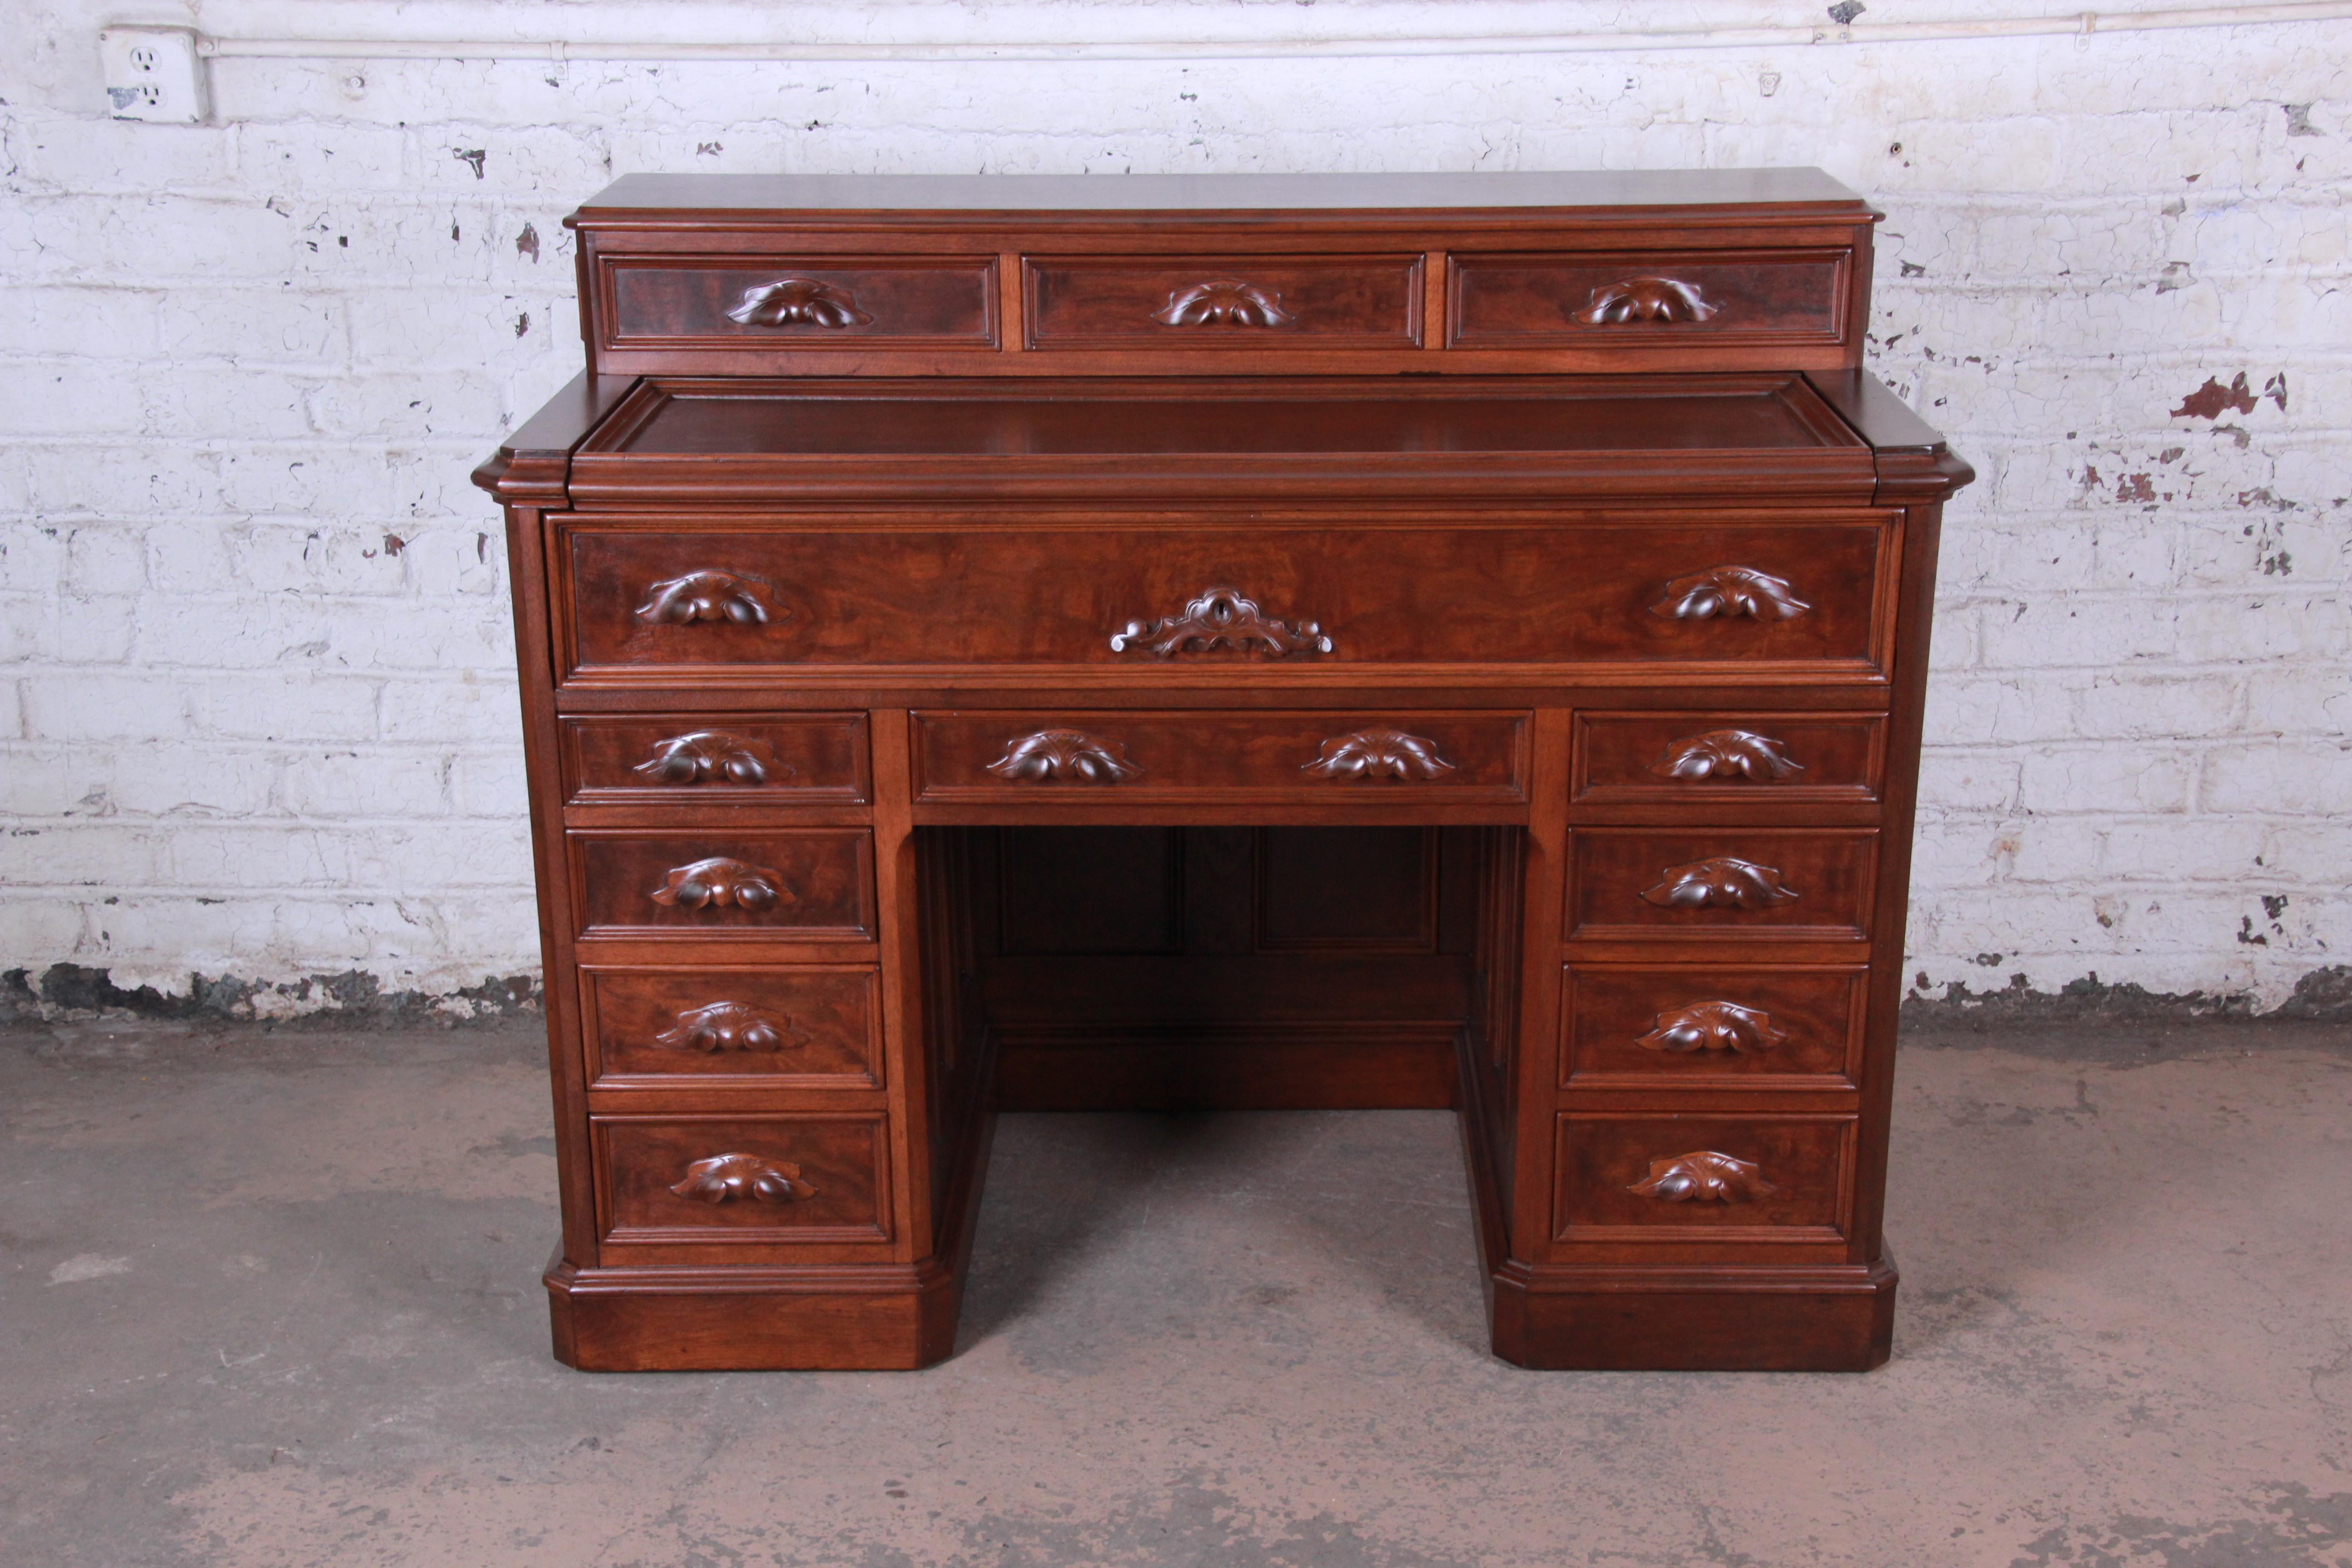 Offering an exceptional and truly one-of-a-kind 19th century Victorian carved mahogany railroad desk. The desk came from a Chicago railway station and was made by Tillman Silsbee & Co. of Detroit, MI, circa 1850. It features gorgeous flame mahogany